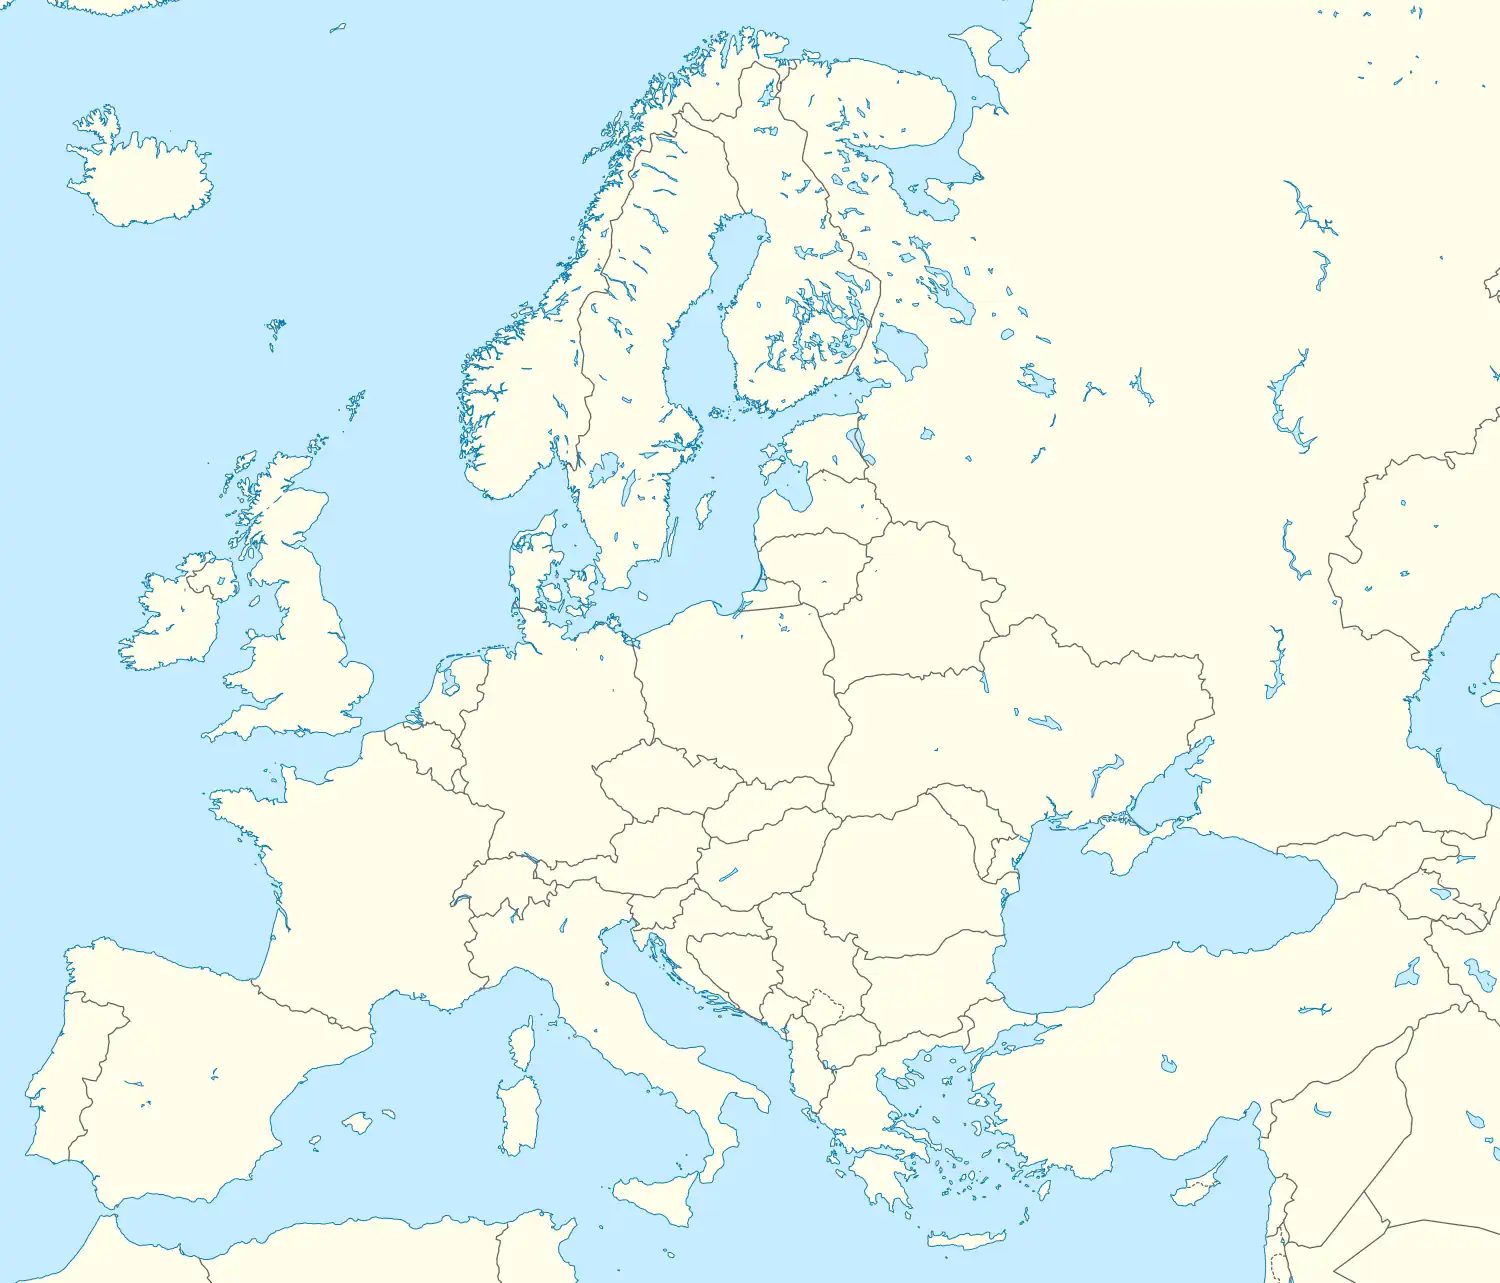 ORY/LFPO is located in Europe